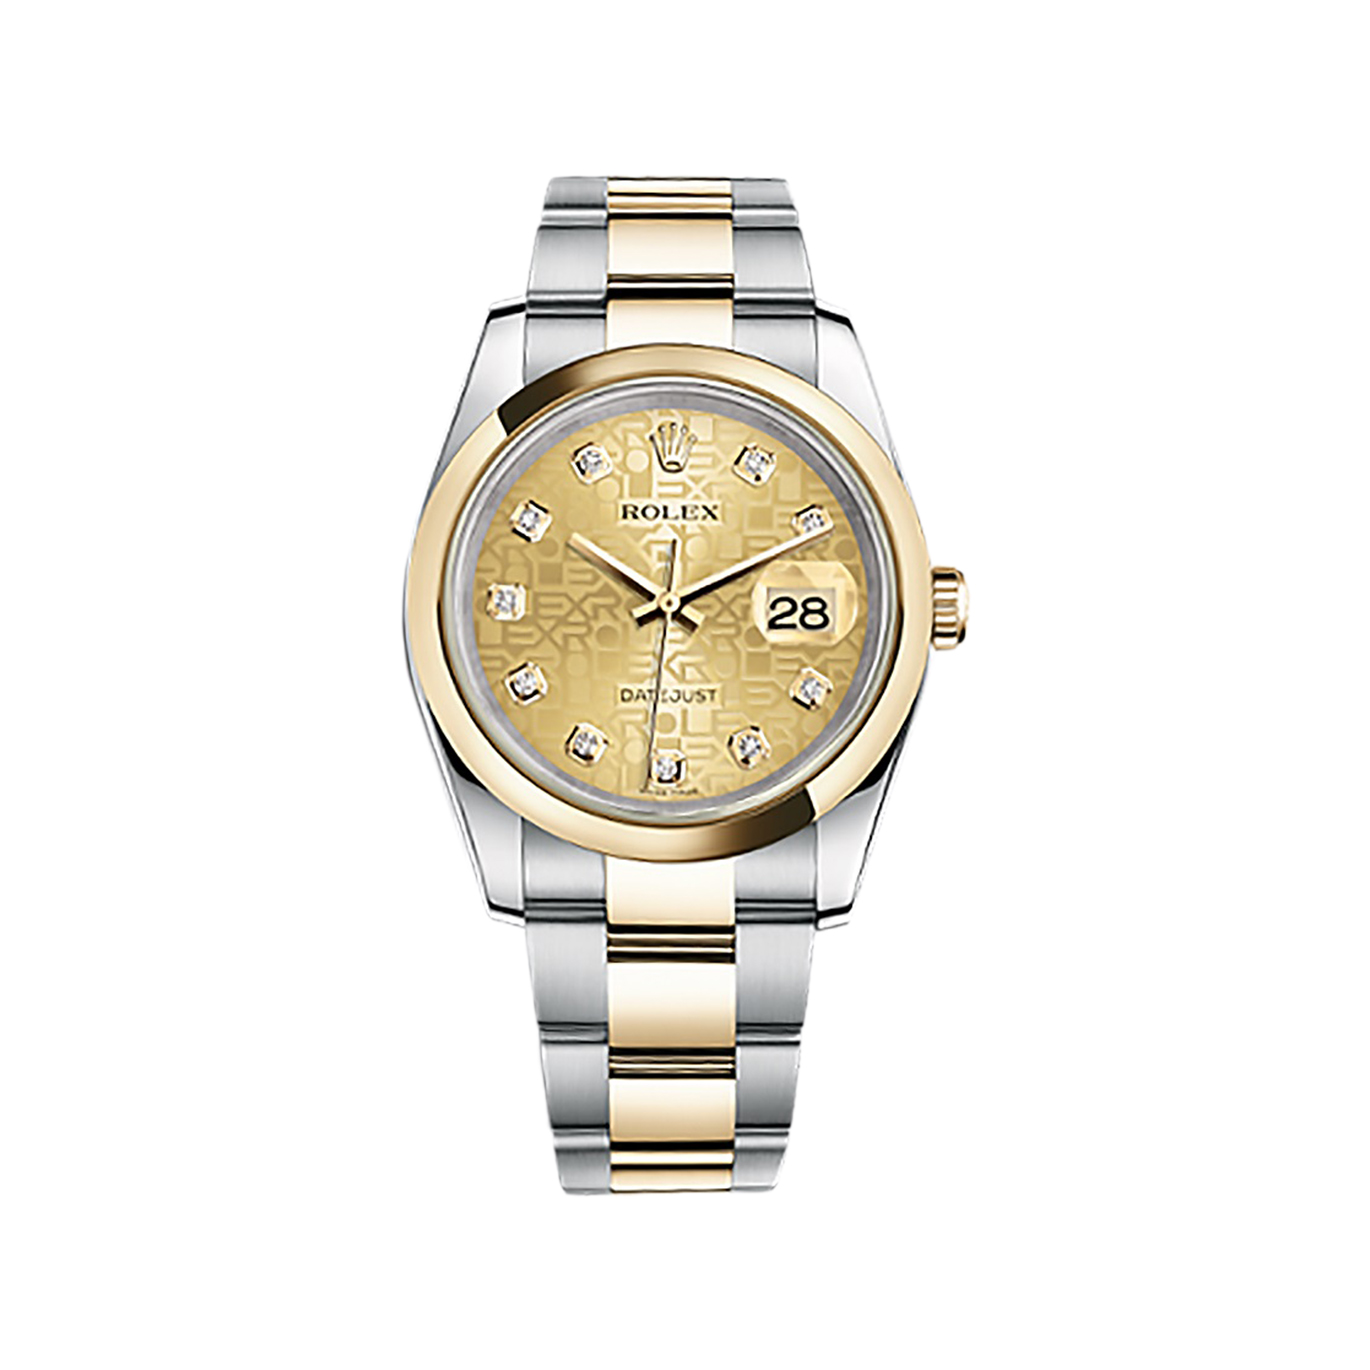 Datejust 36 116203 Gold & Stainless Steel Watch (Champagne Jubilee Design Set with Diamonds)